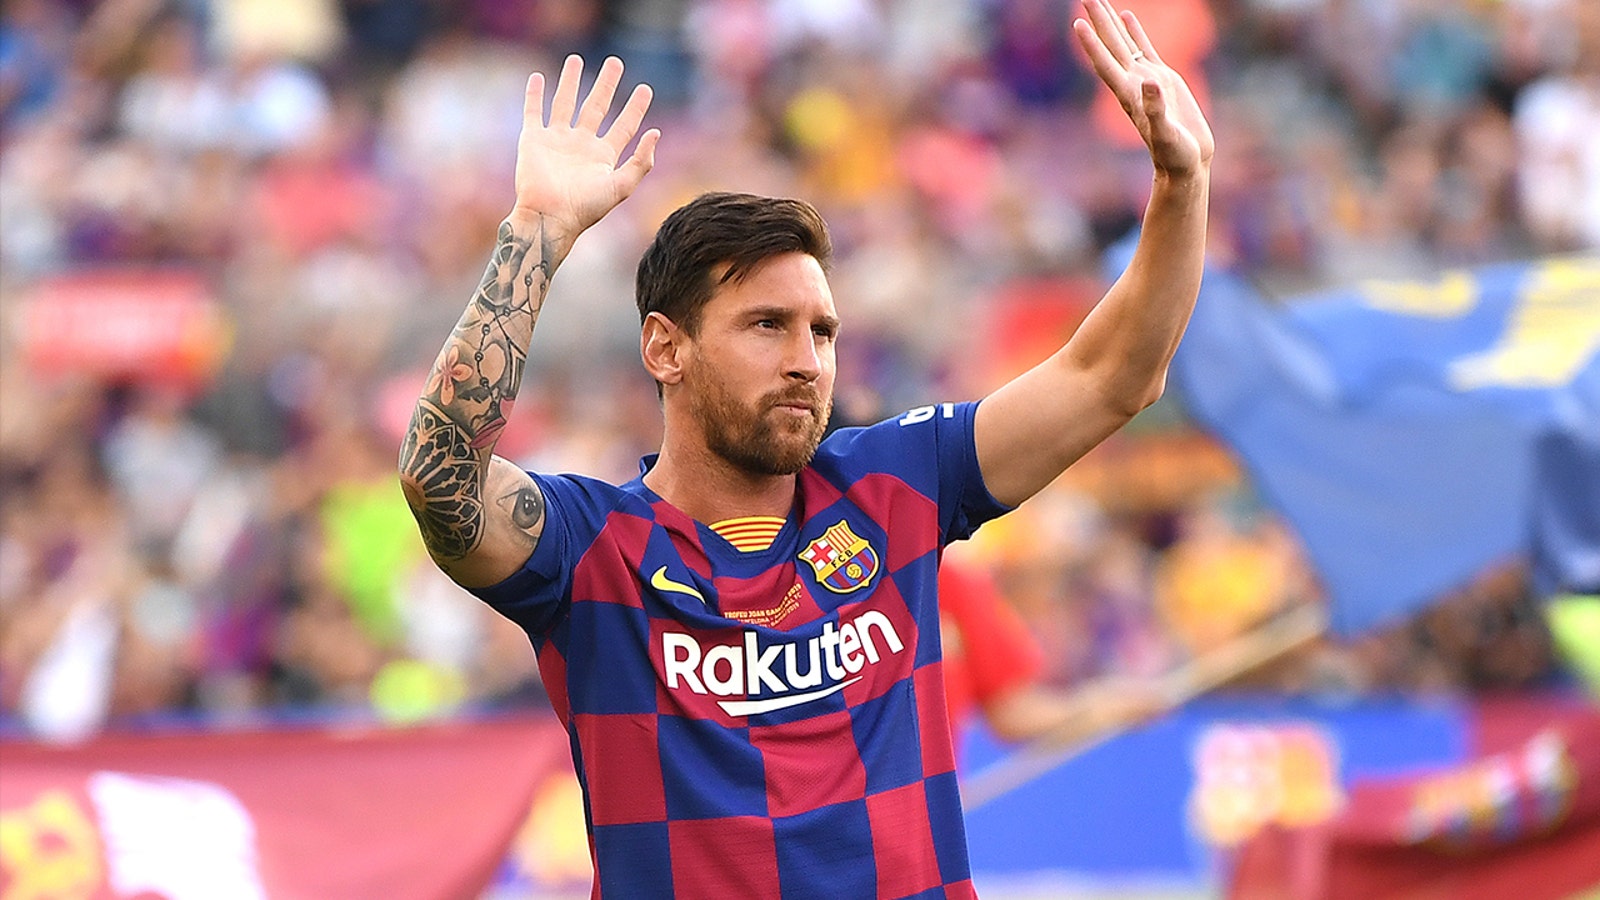 Lionel Messi leaving Barcelona is one of the biggest breakups in sports history